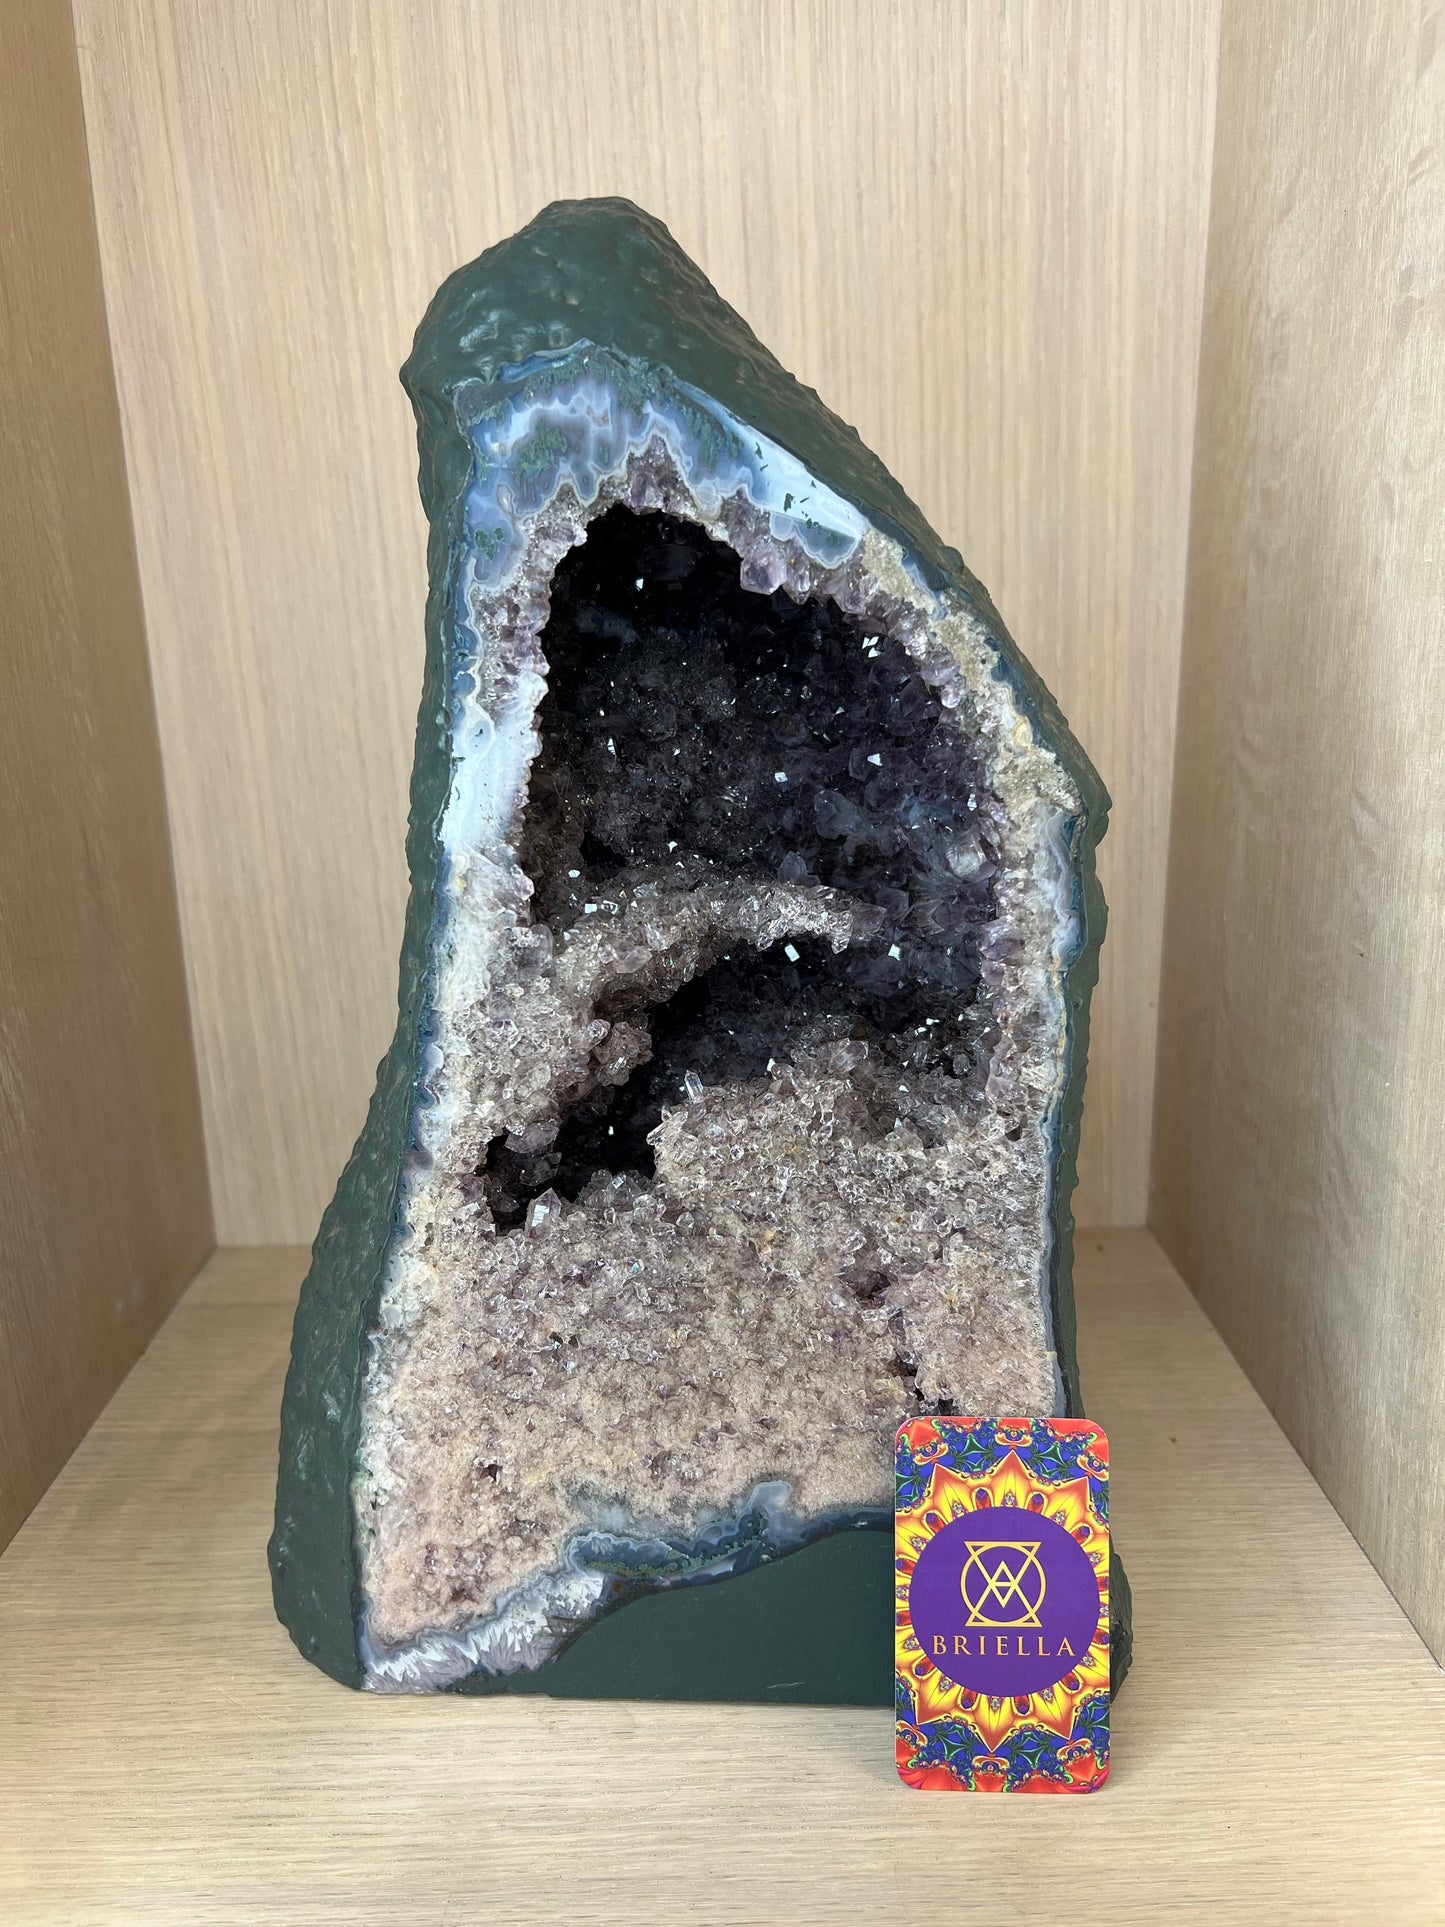 CrystalLarge Amethyst Geode Crystal Natural self-standing rock for tabletop home decor healing stone 33.35lb 15" high